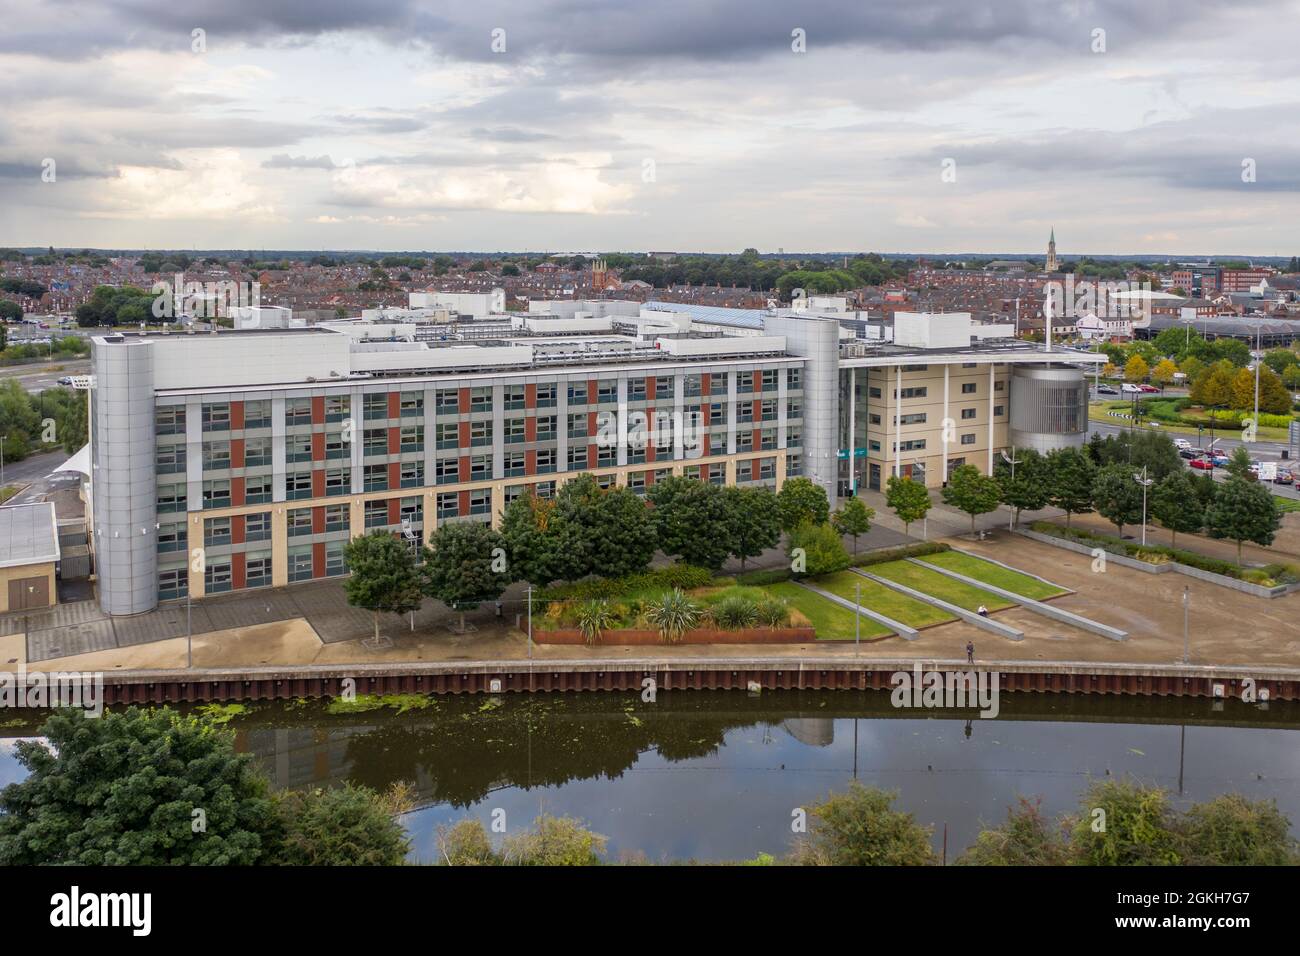 DONCASTER, UK - SEPTEMBER 10, 2021.  An aerial view of Doncaster College Campus and University centre building Stock Photo